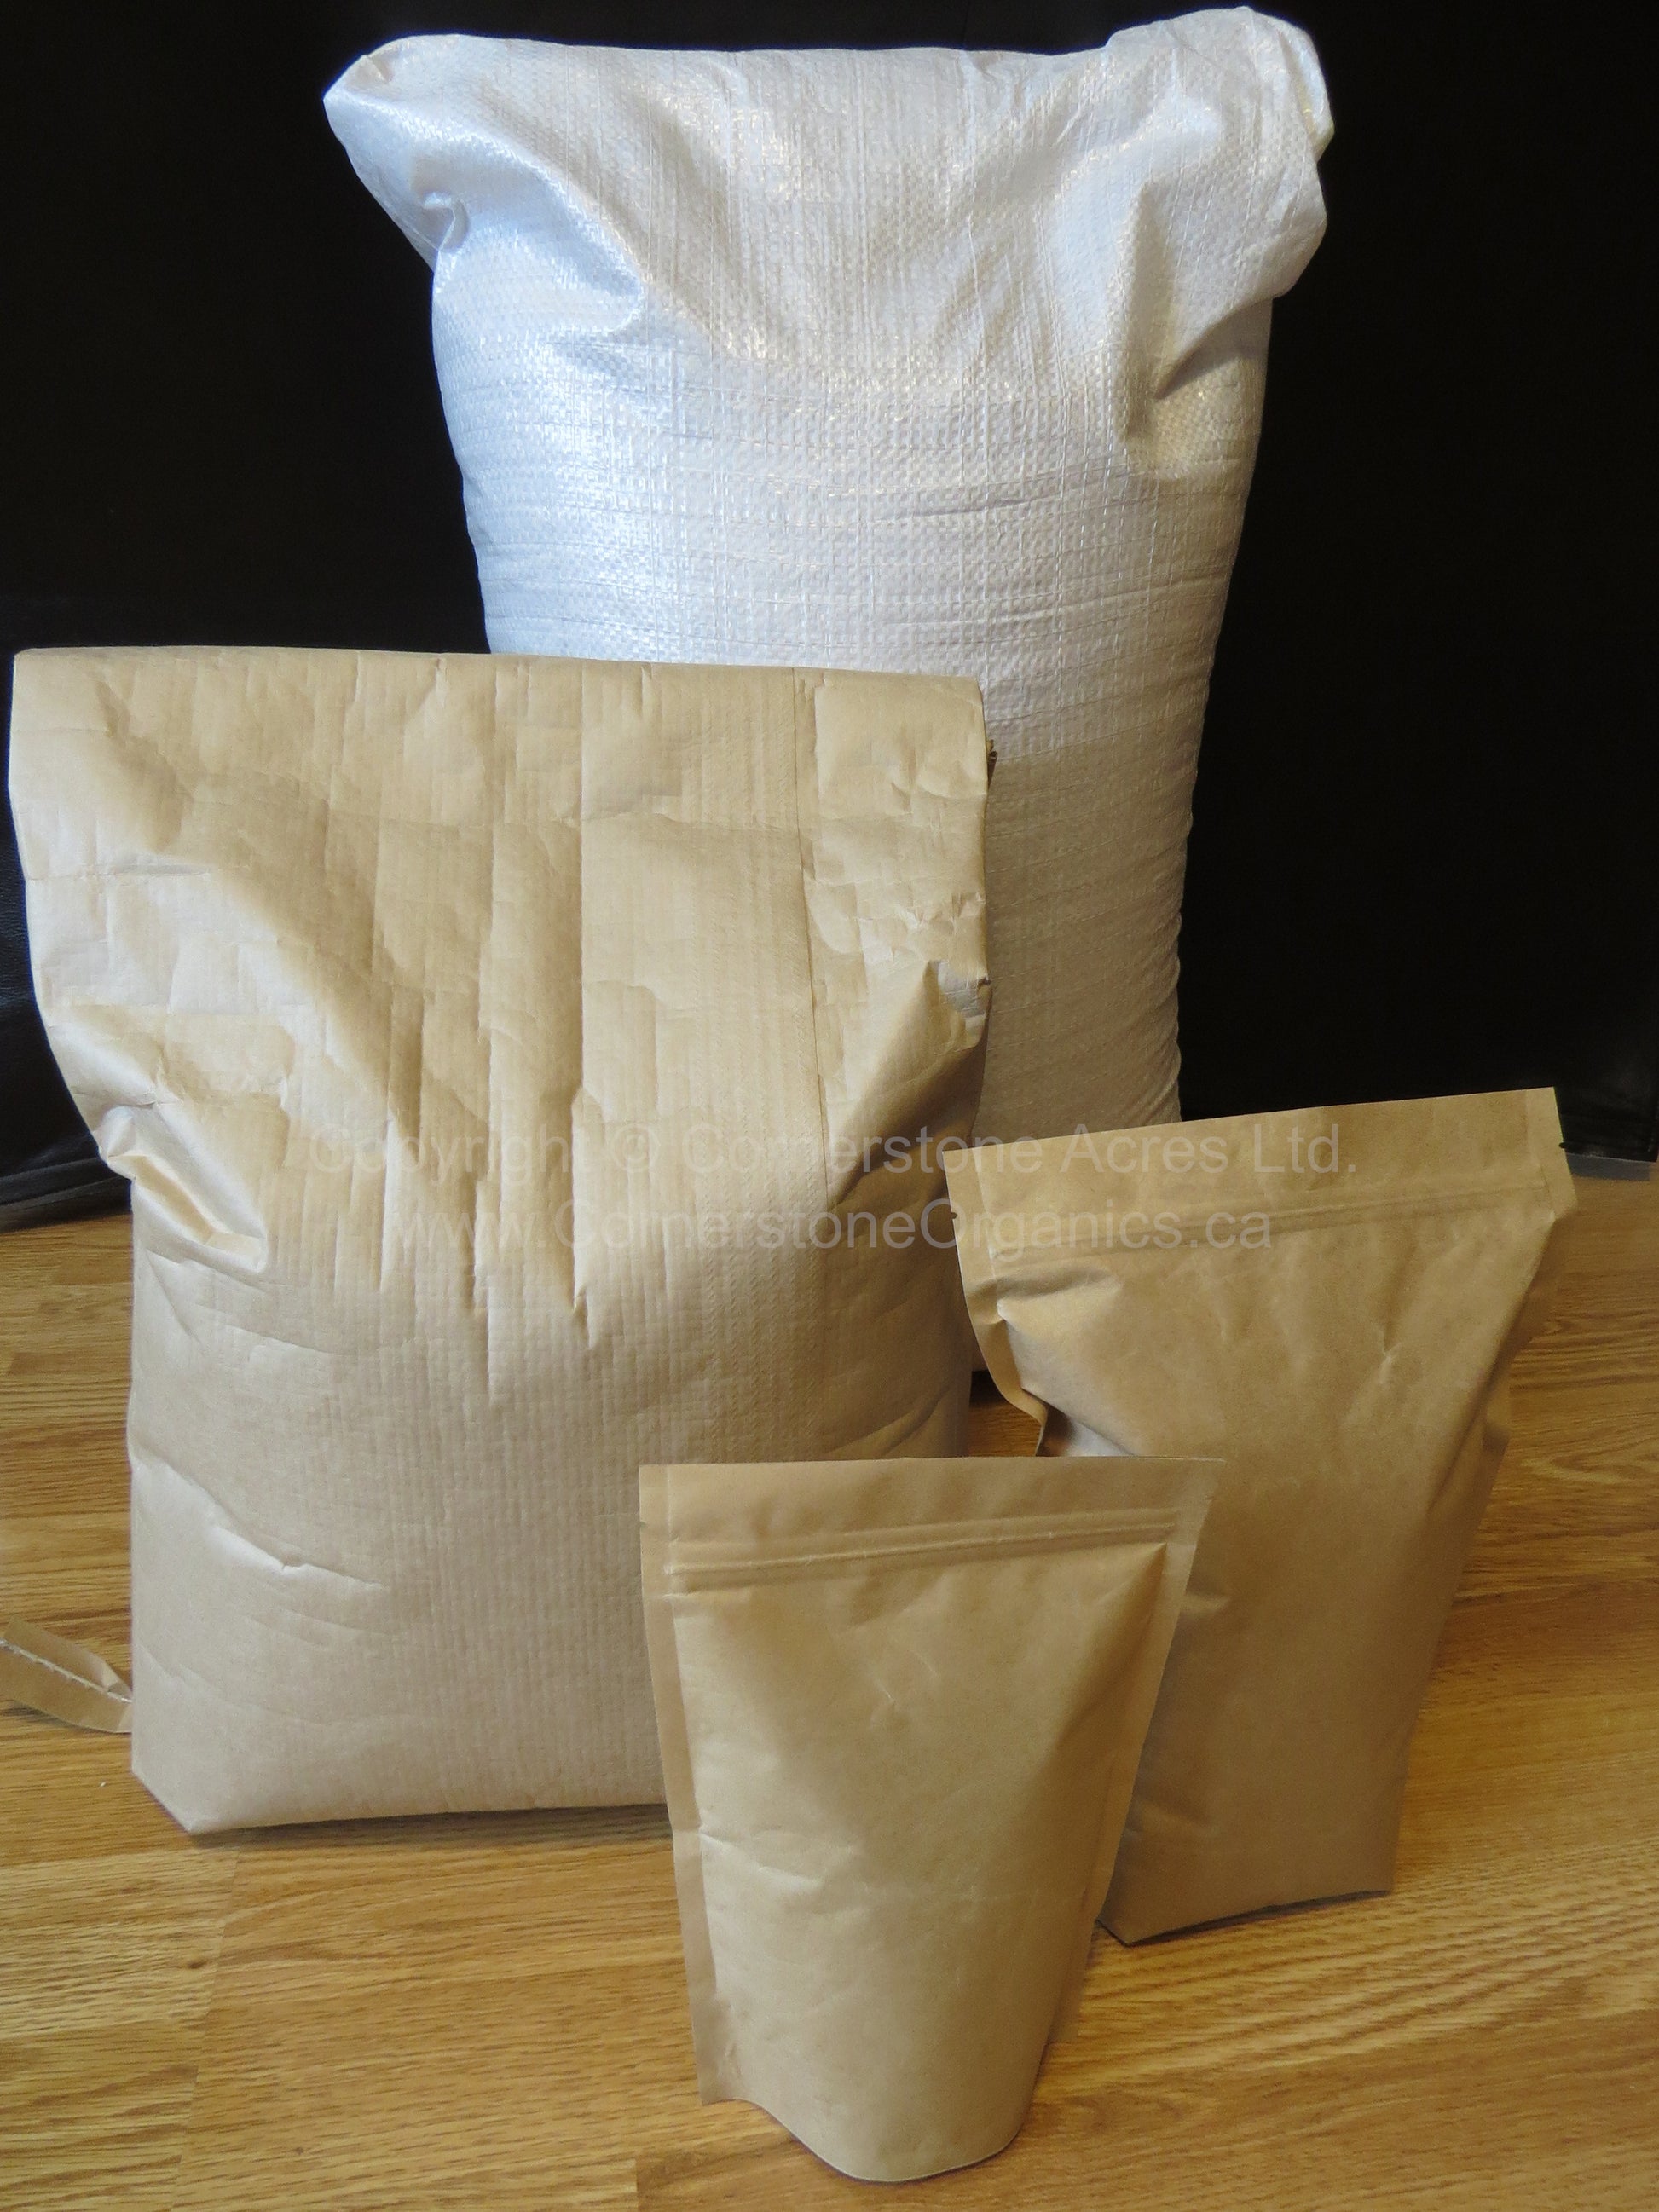 Bags of Whole Yellow Peas